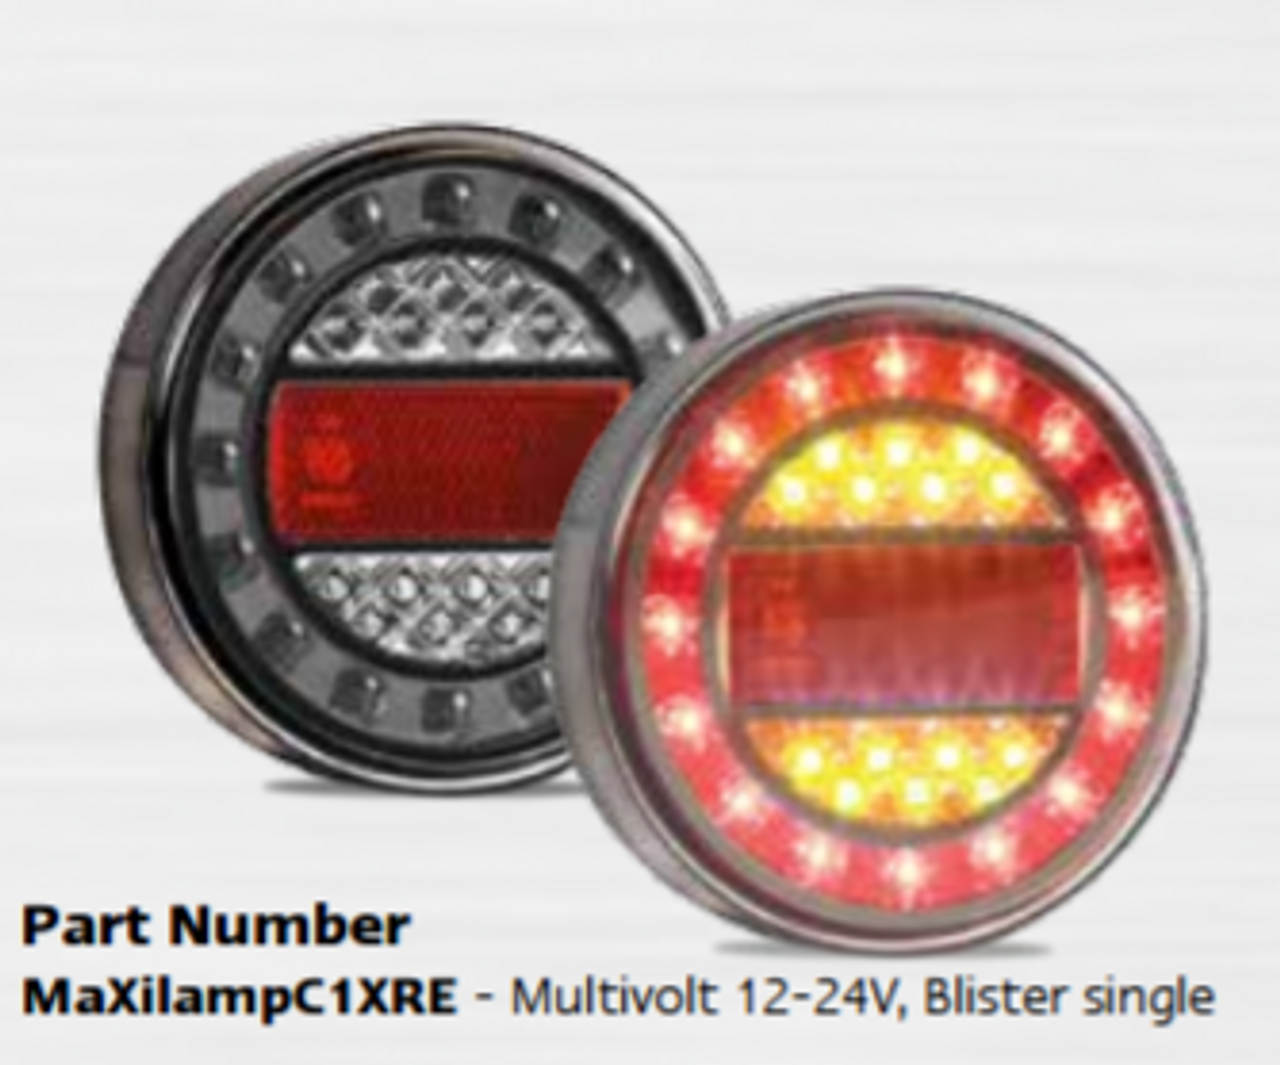 MAXILAMPC1XRE - Modern and Stylish Maxilamp Stop, Tail, Indicator with Reflector Light. Outer Smoked Lens. 12v & 24 Volt DC. Single Pack. LED Auto Lamps. Ultimate LED. 